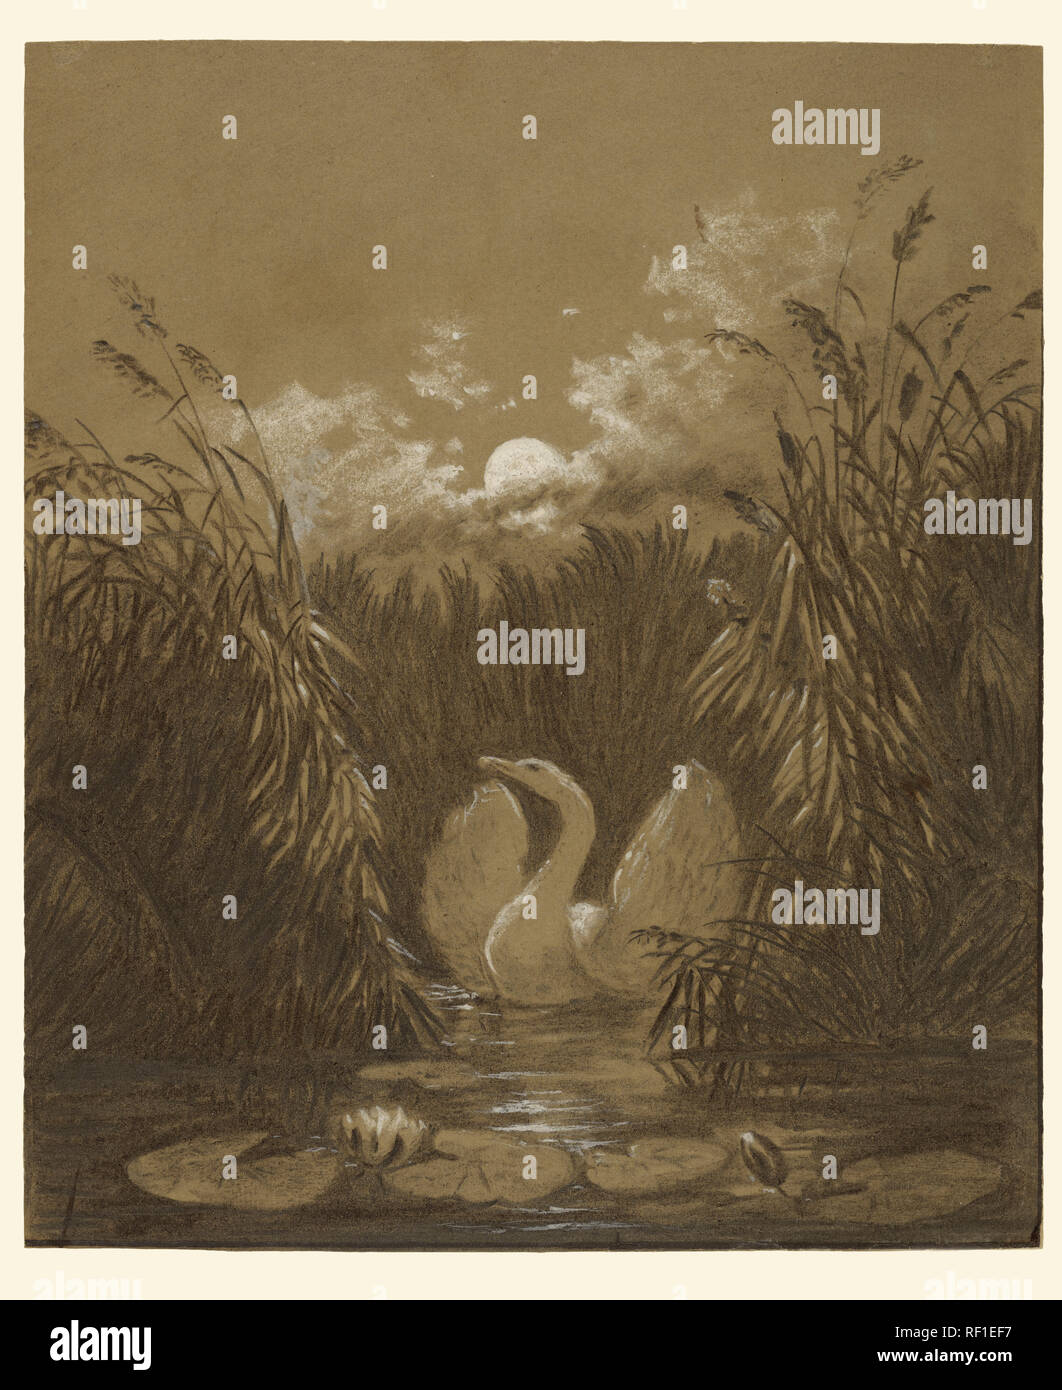 A Swan Among the Reeds, by Moonlight; Carl Gustav Carus (German, 1789 - 1869); Germany; September 18, 1852; Charcoal with white gouache heightening on brown paper laid down on thin board; 22.8 x 19.1 cm (9 x 7 1/2 in.); 2013.41 Stock Photo